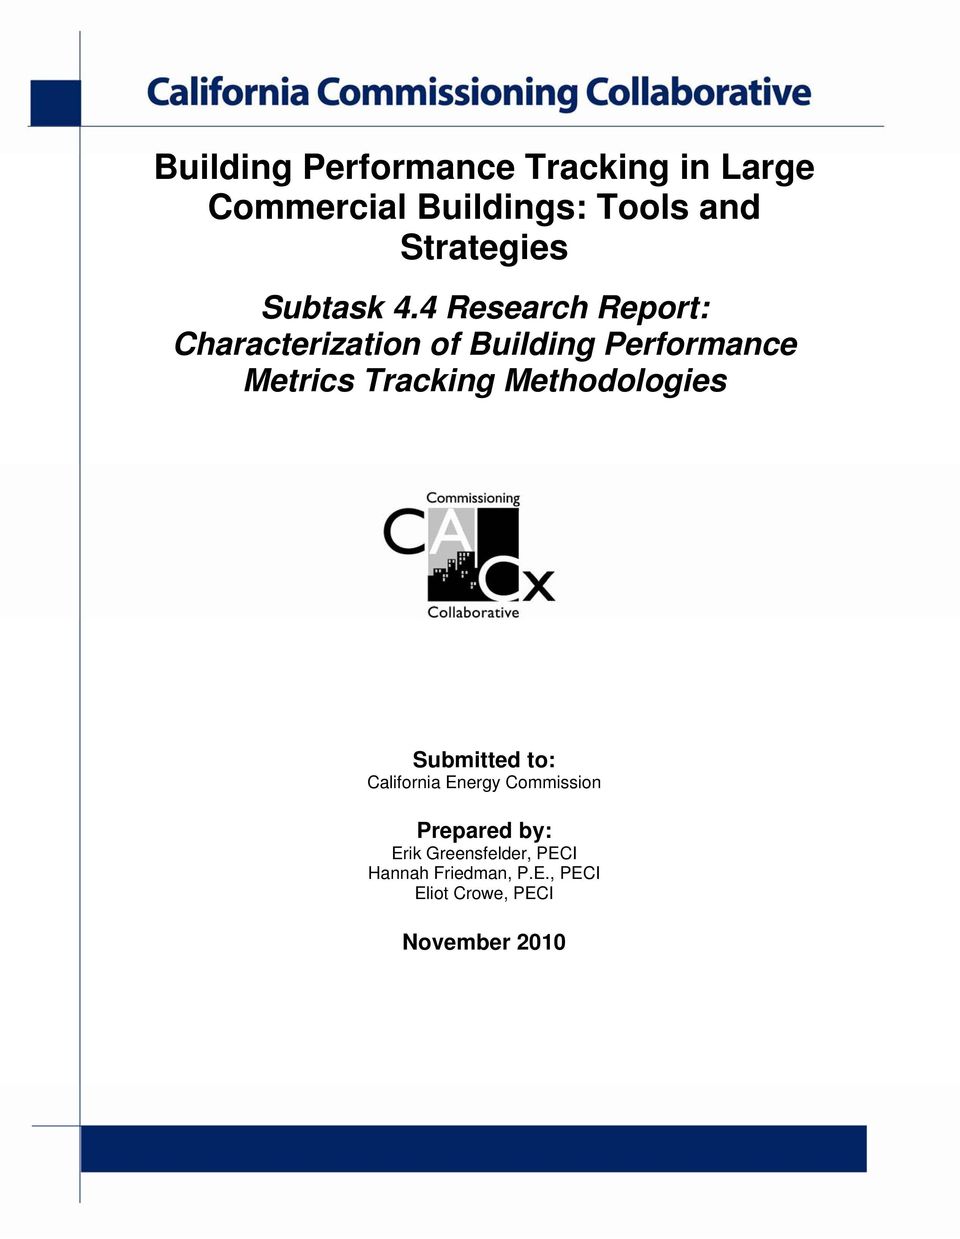 4 Research Report: Characterization of Building Performance Metrics Tracking